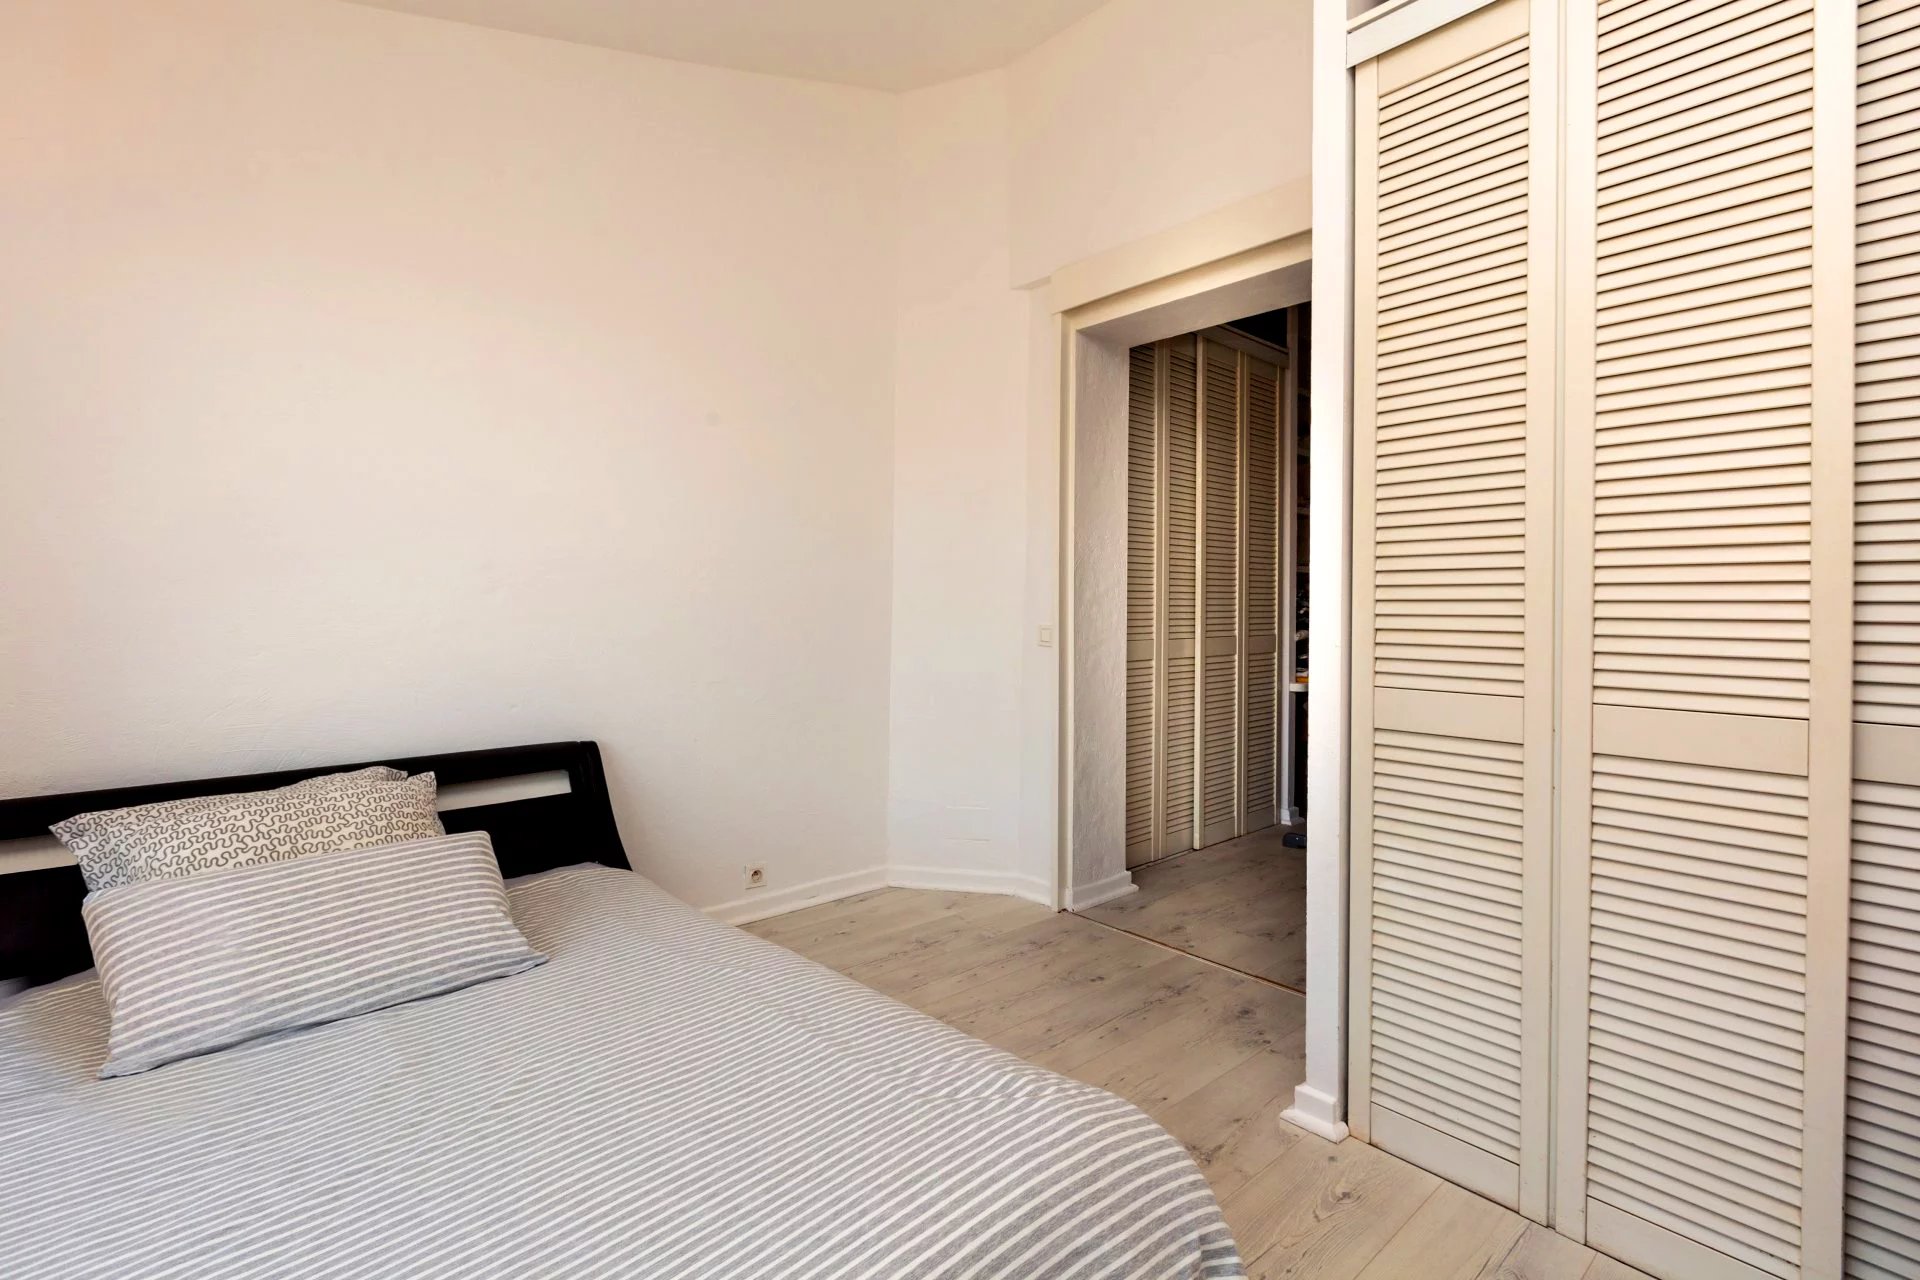 Recently renovated flat, very close to the beach and the port